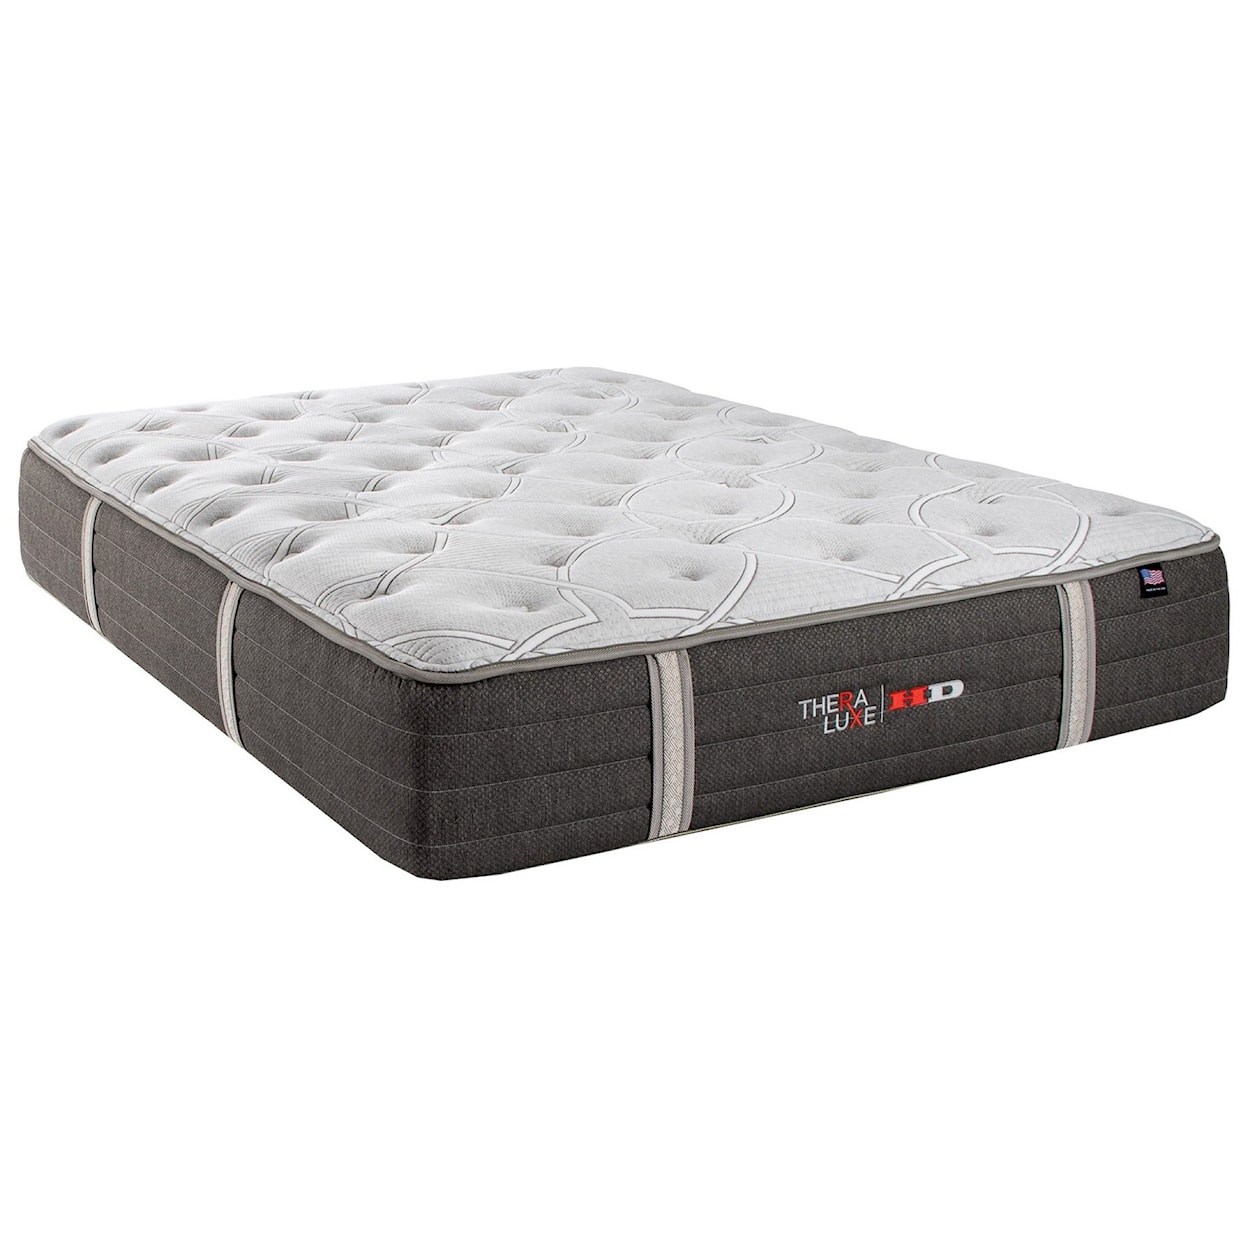 Therapedic Theraluxe Sequoia King Plush Pocketed Coil Mattress